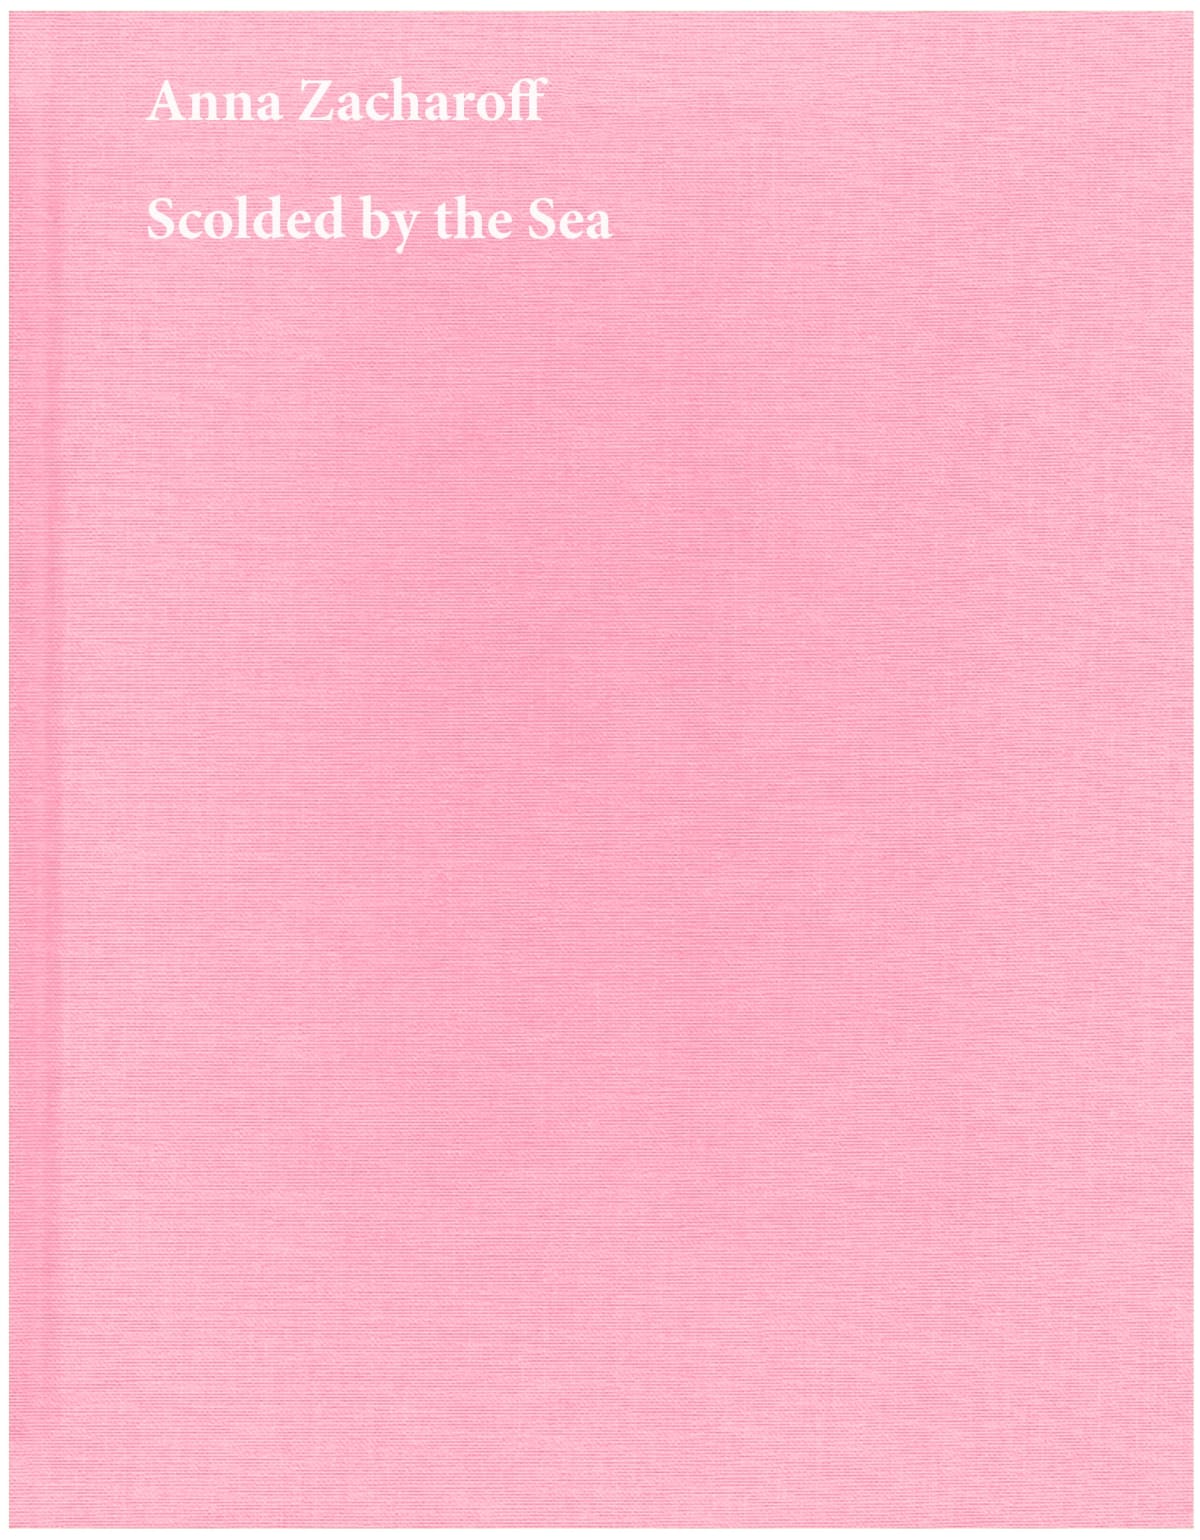 Scolded by The Sea